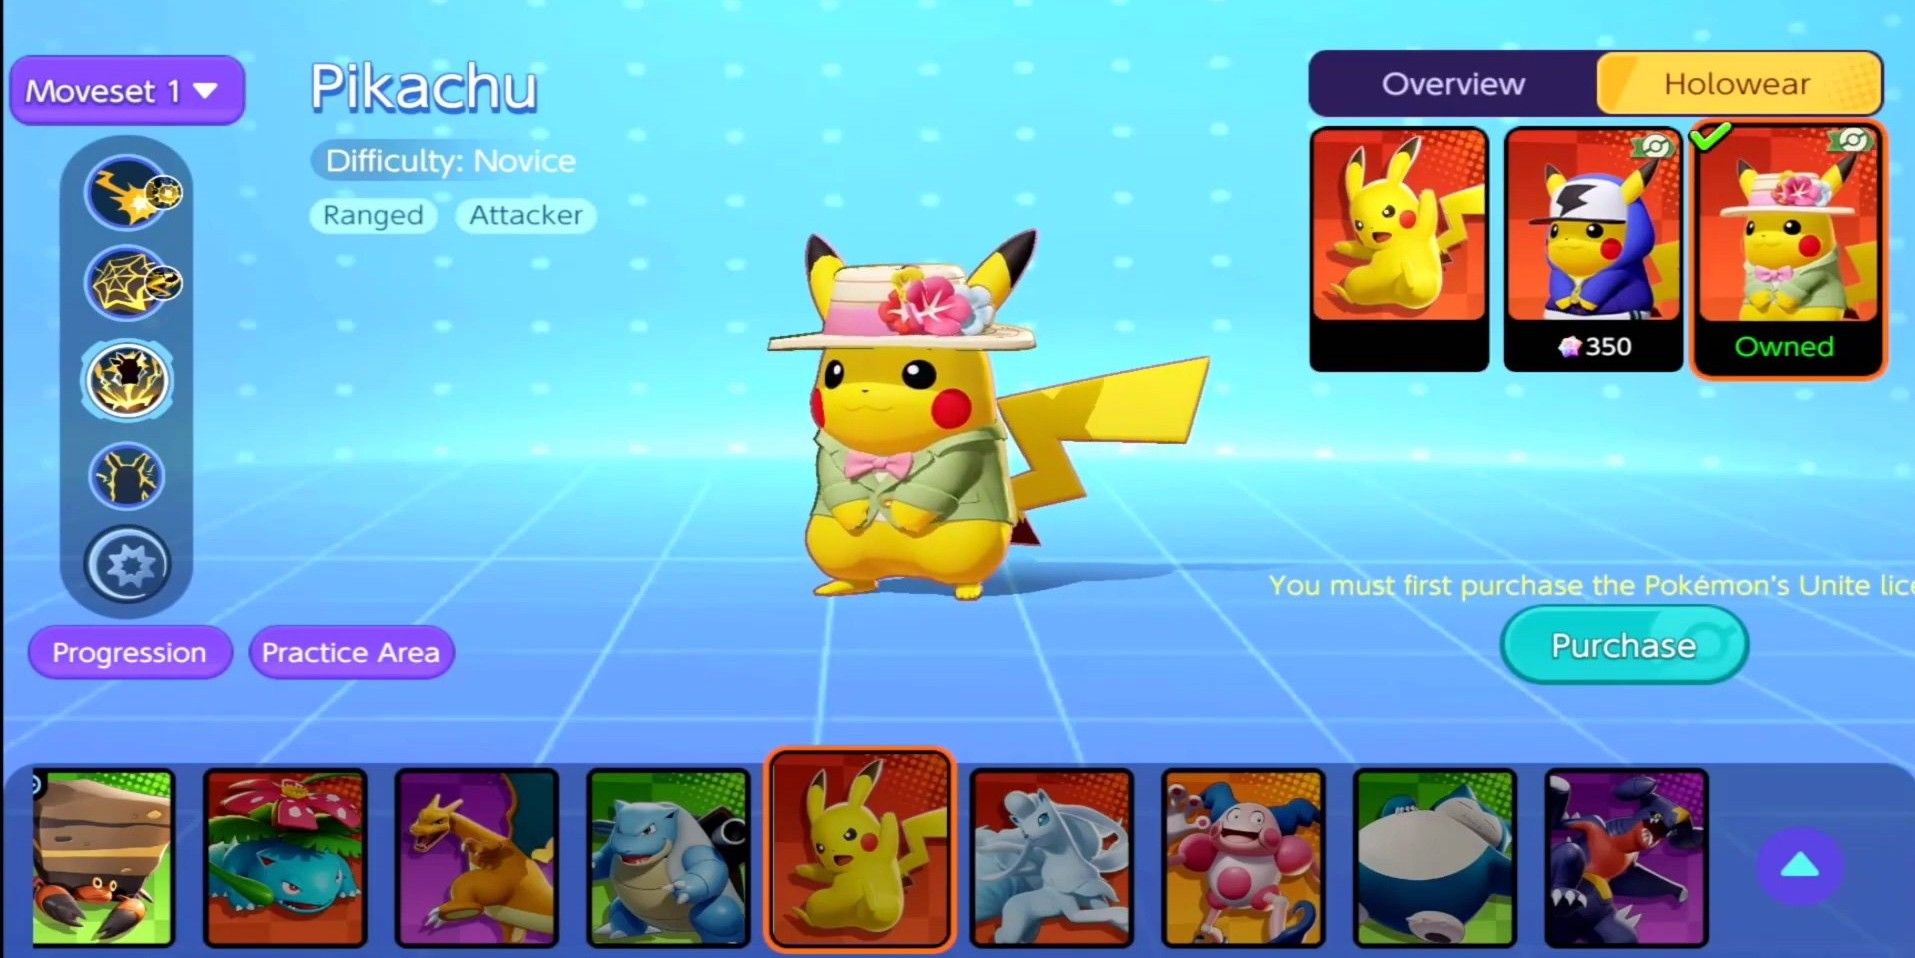 All Pokemon Unite Skins Available In The Beta Have Been Revealed